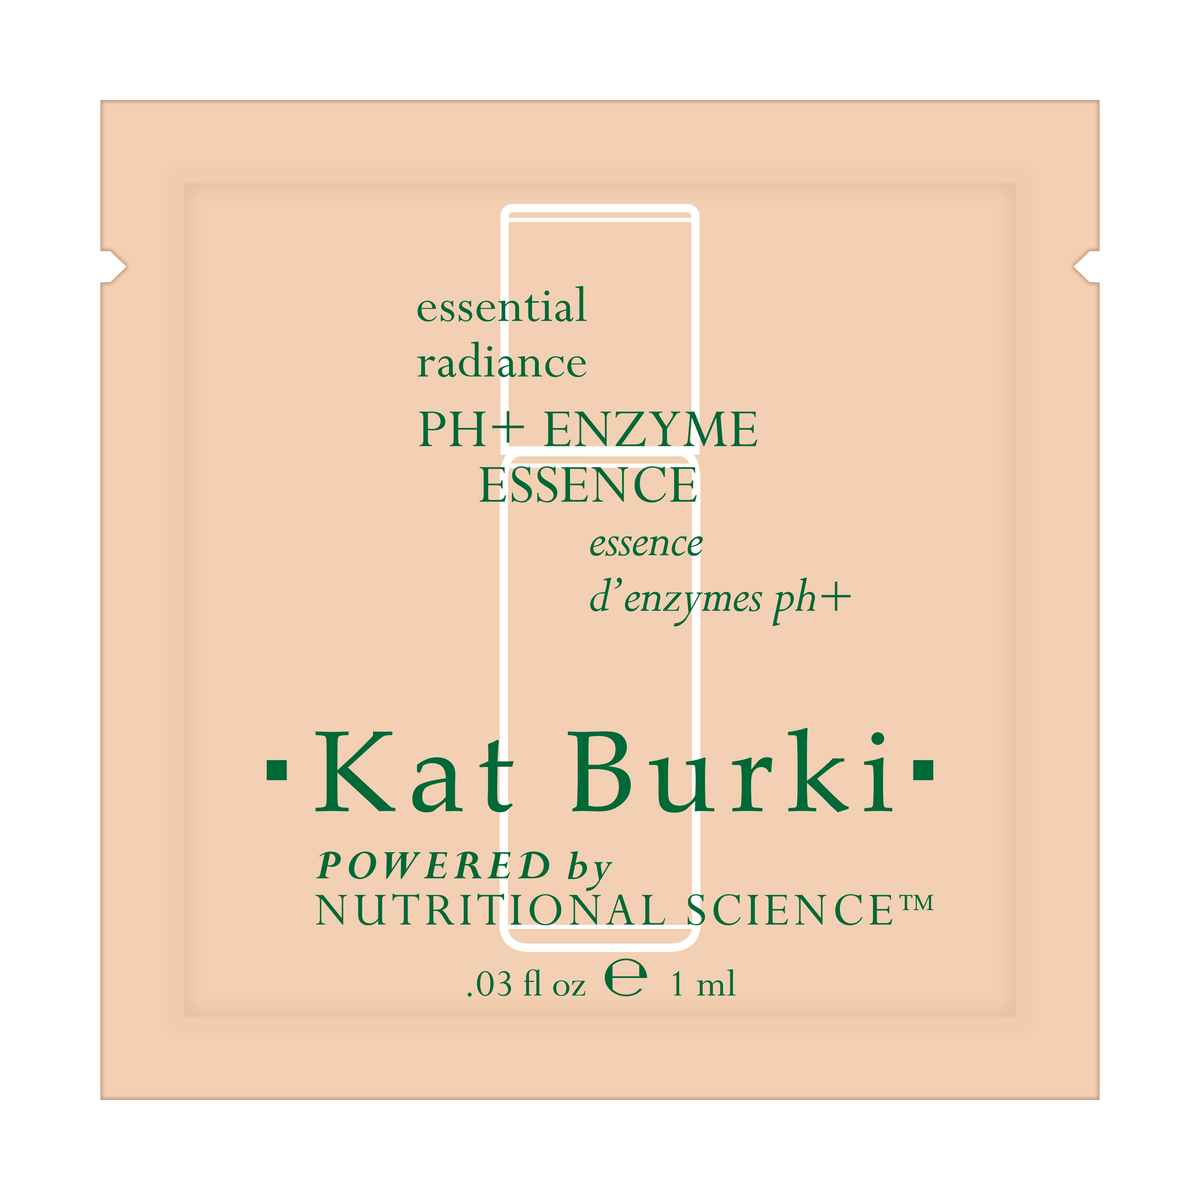 PH+ Enzyme Essence Packette